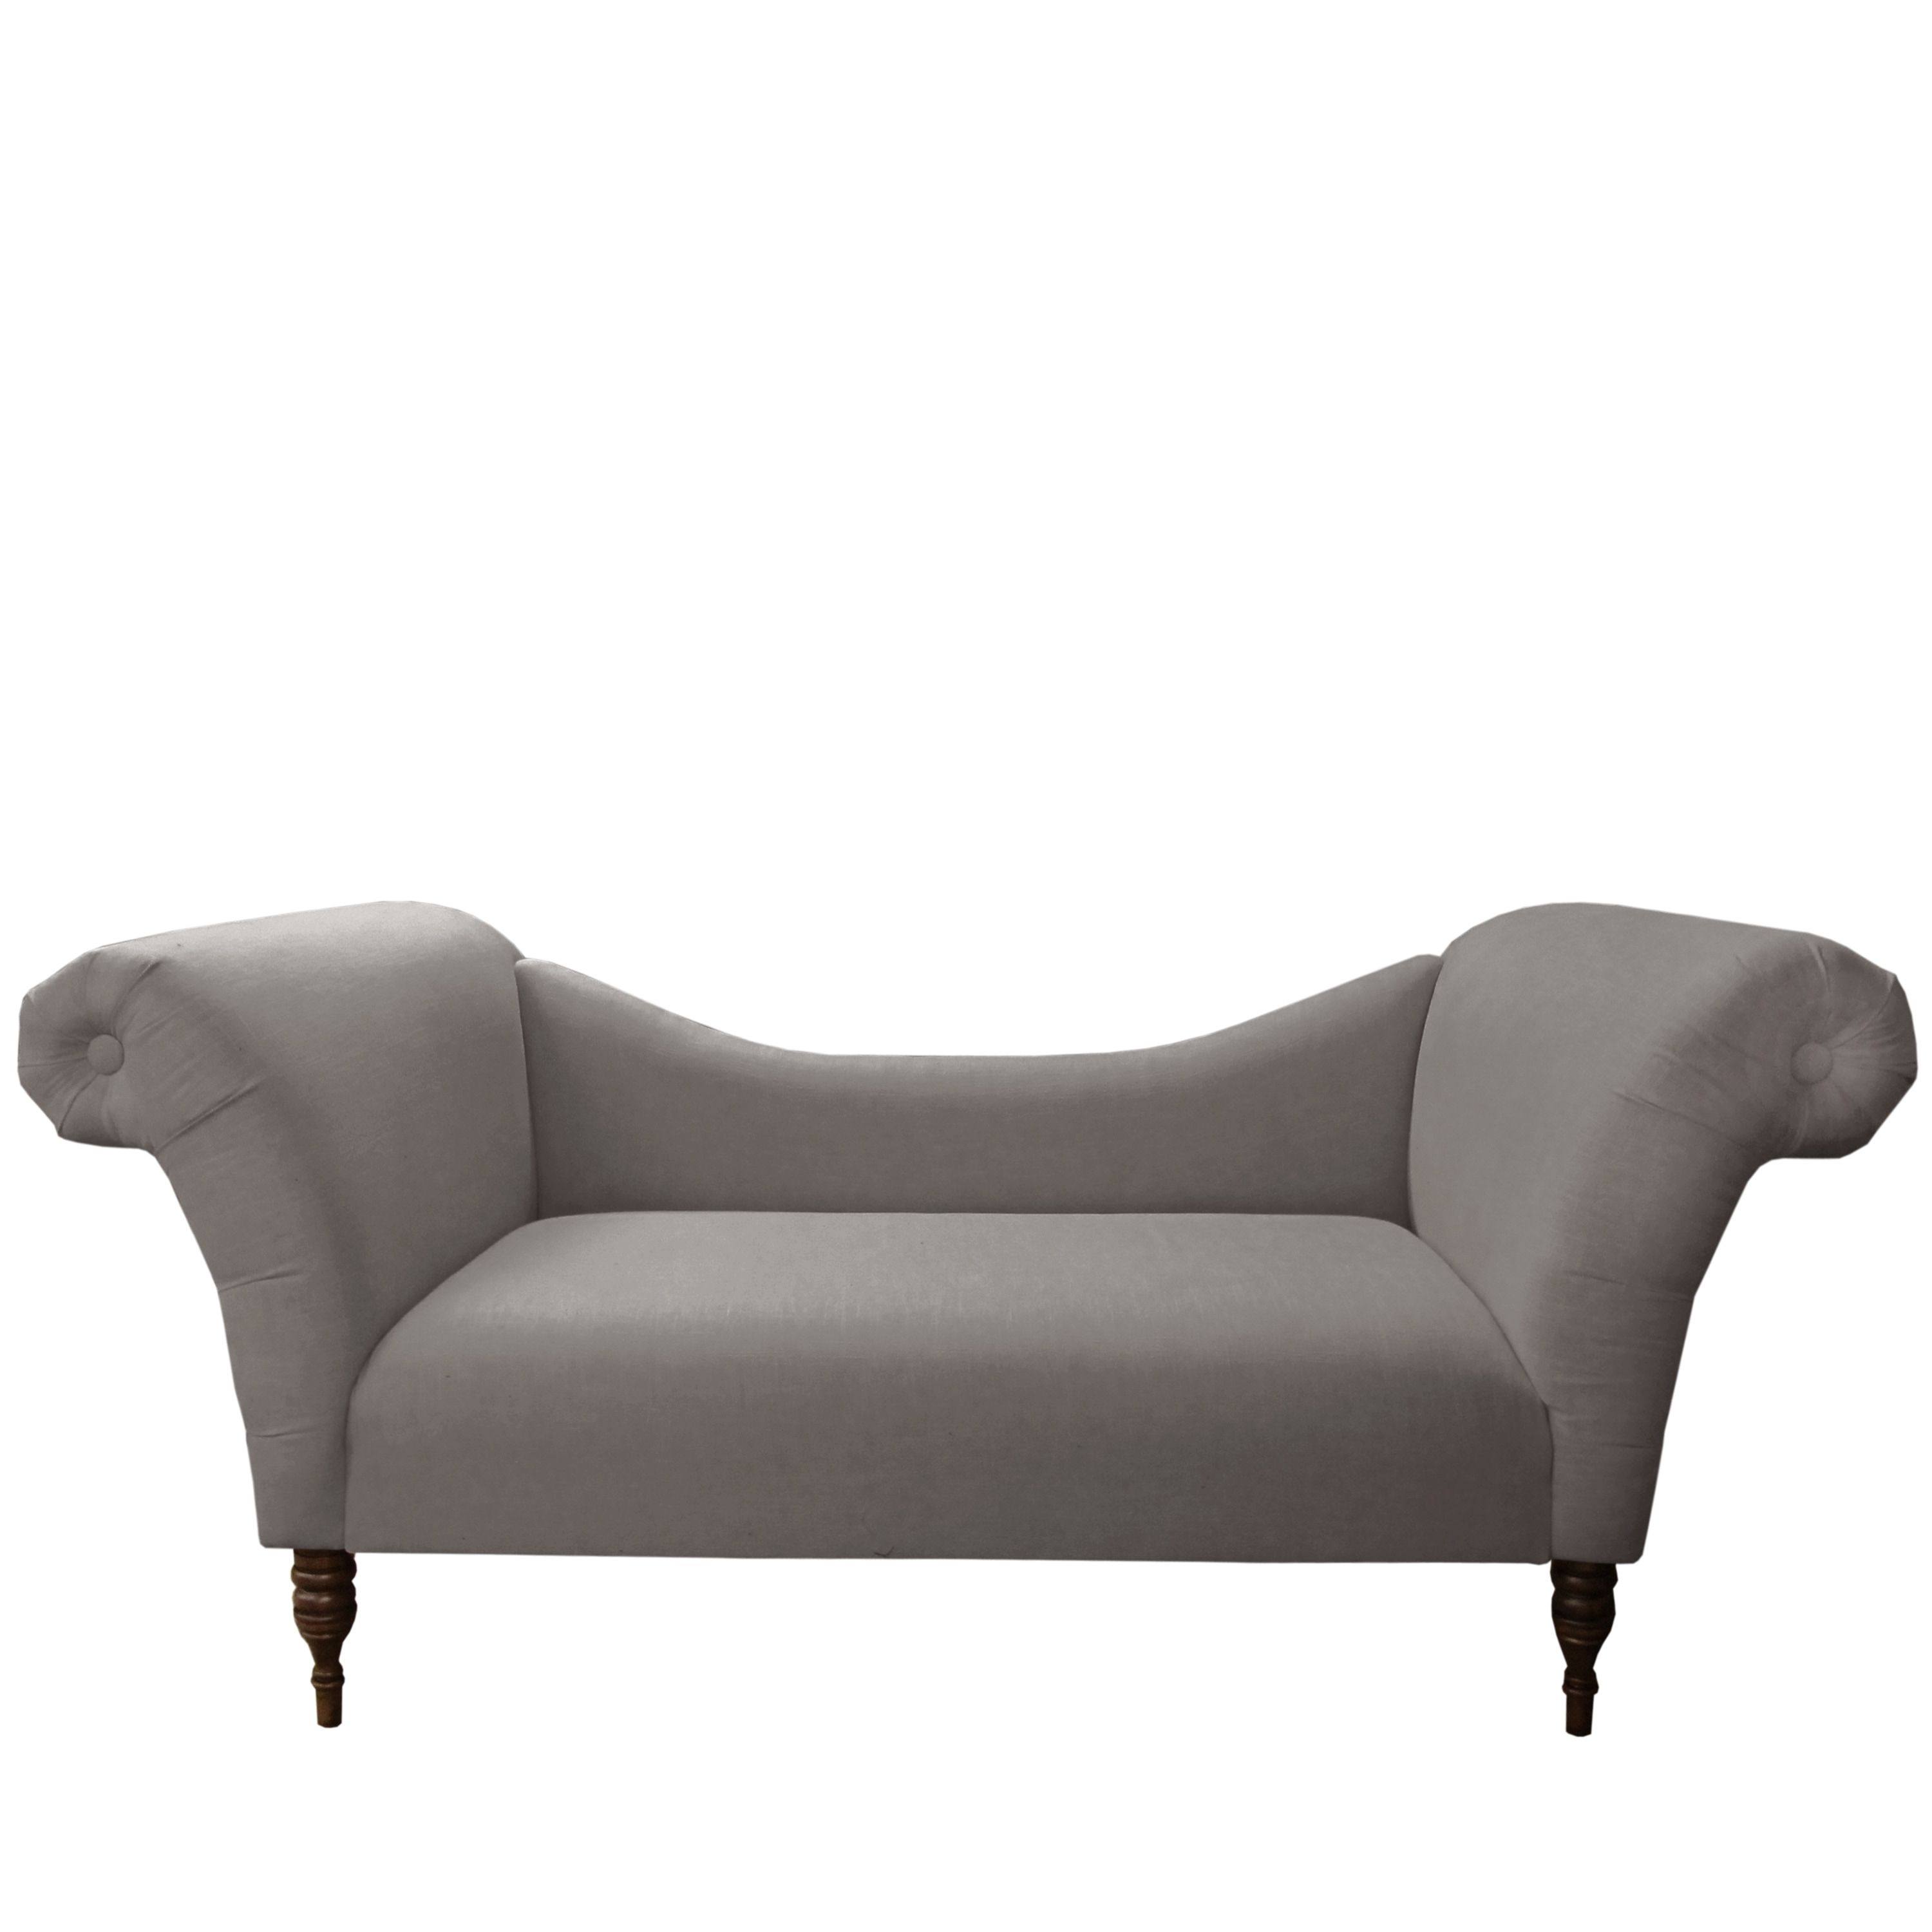 Skyline Furniture Chaise Lounge In Linen Grey – Free Shipping Throughout 2018 Skyline Chaise Lounges (Photo 11 of 15)